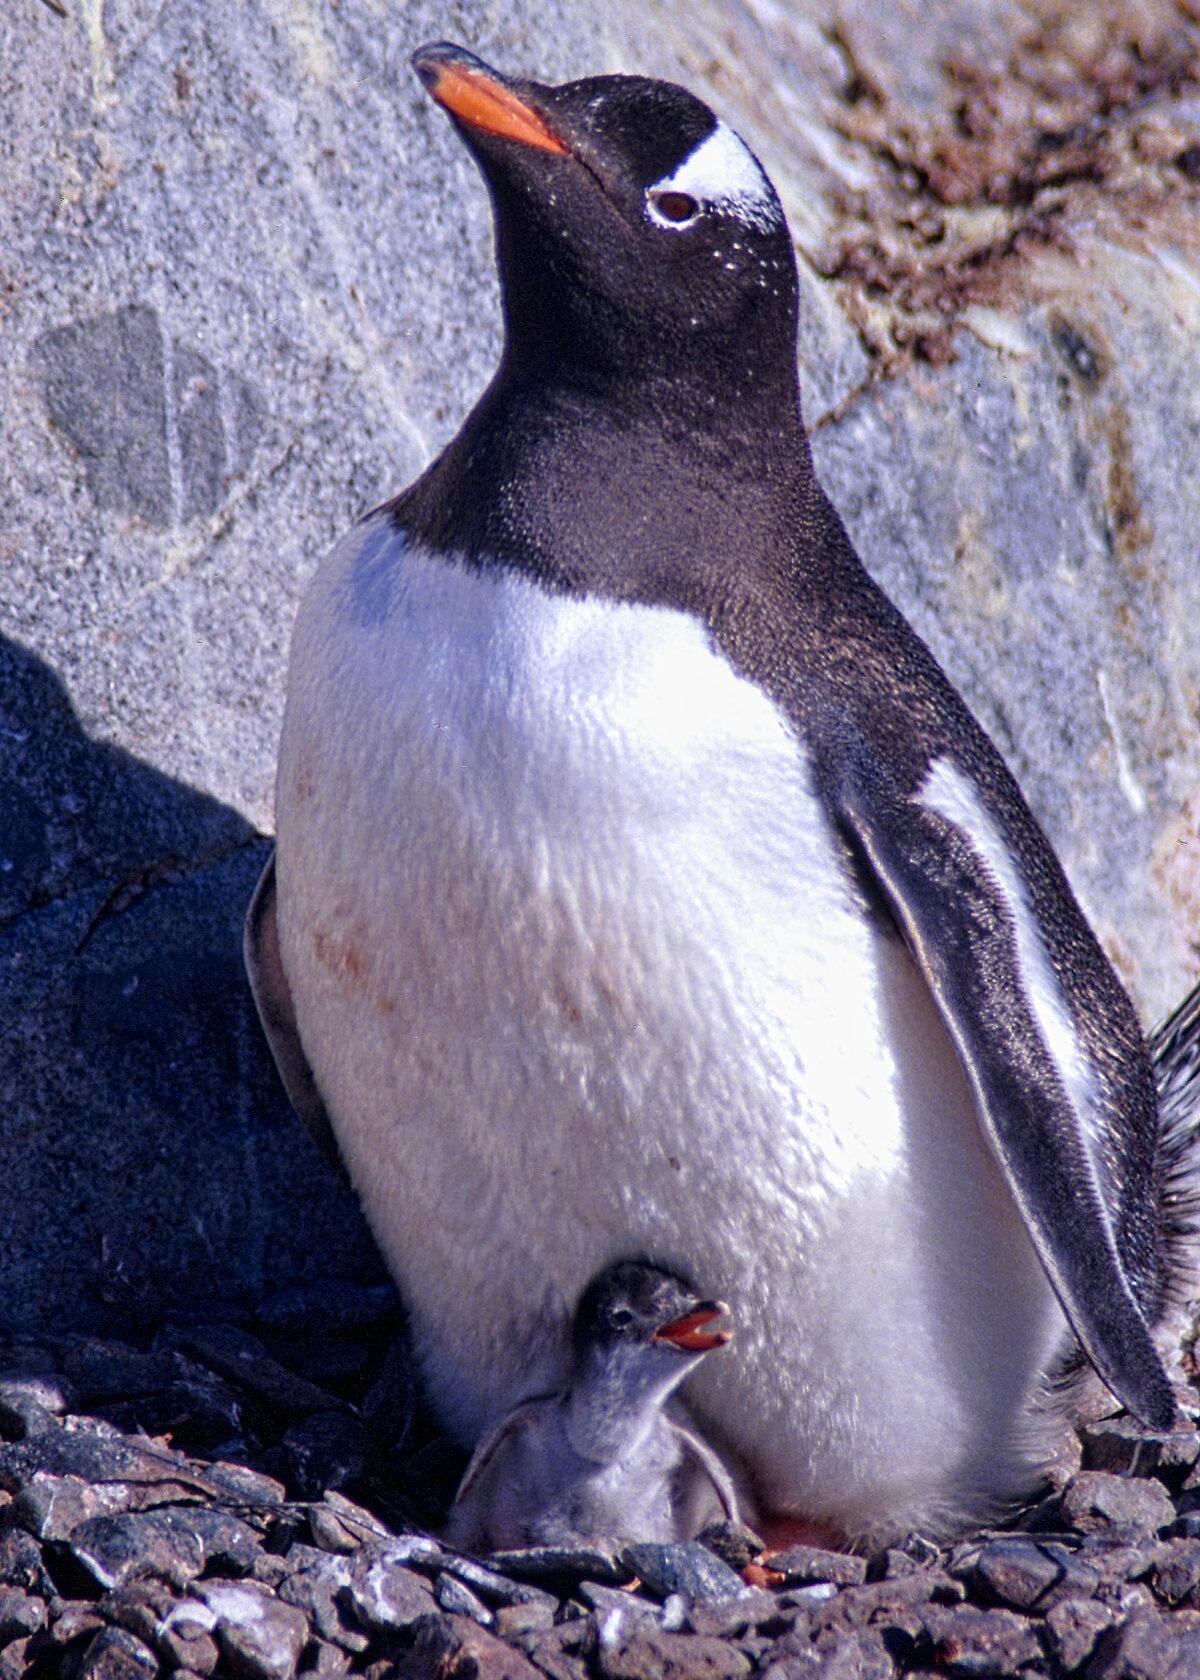 A Gentoo penguin with its chick. (Copyright Fred J. Eckert)